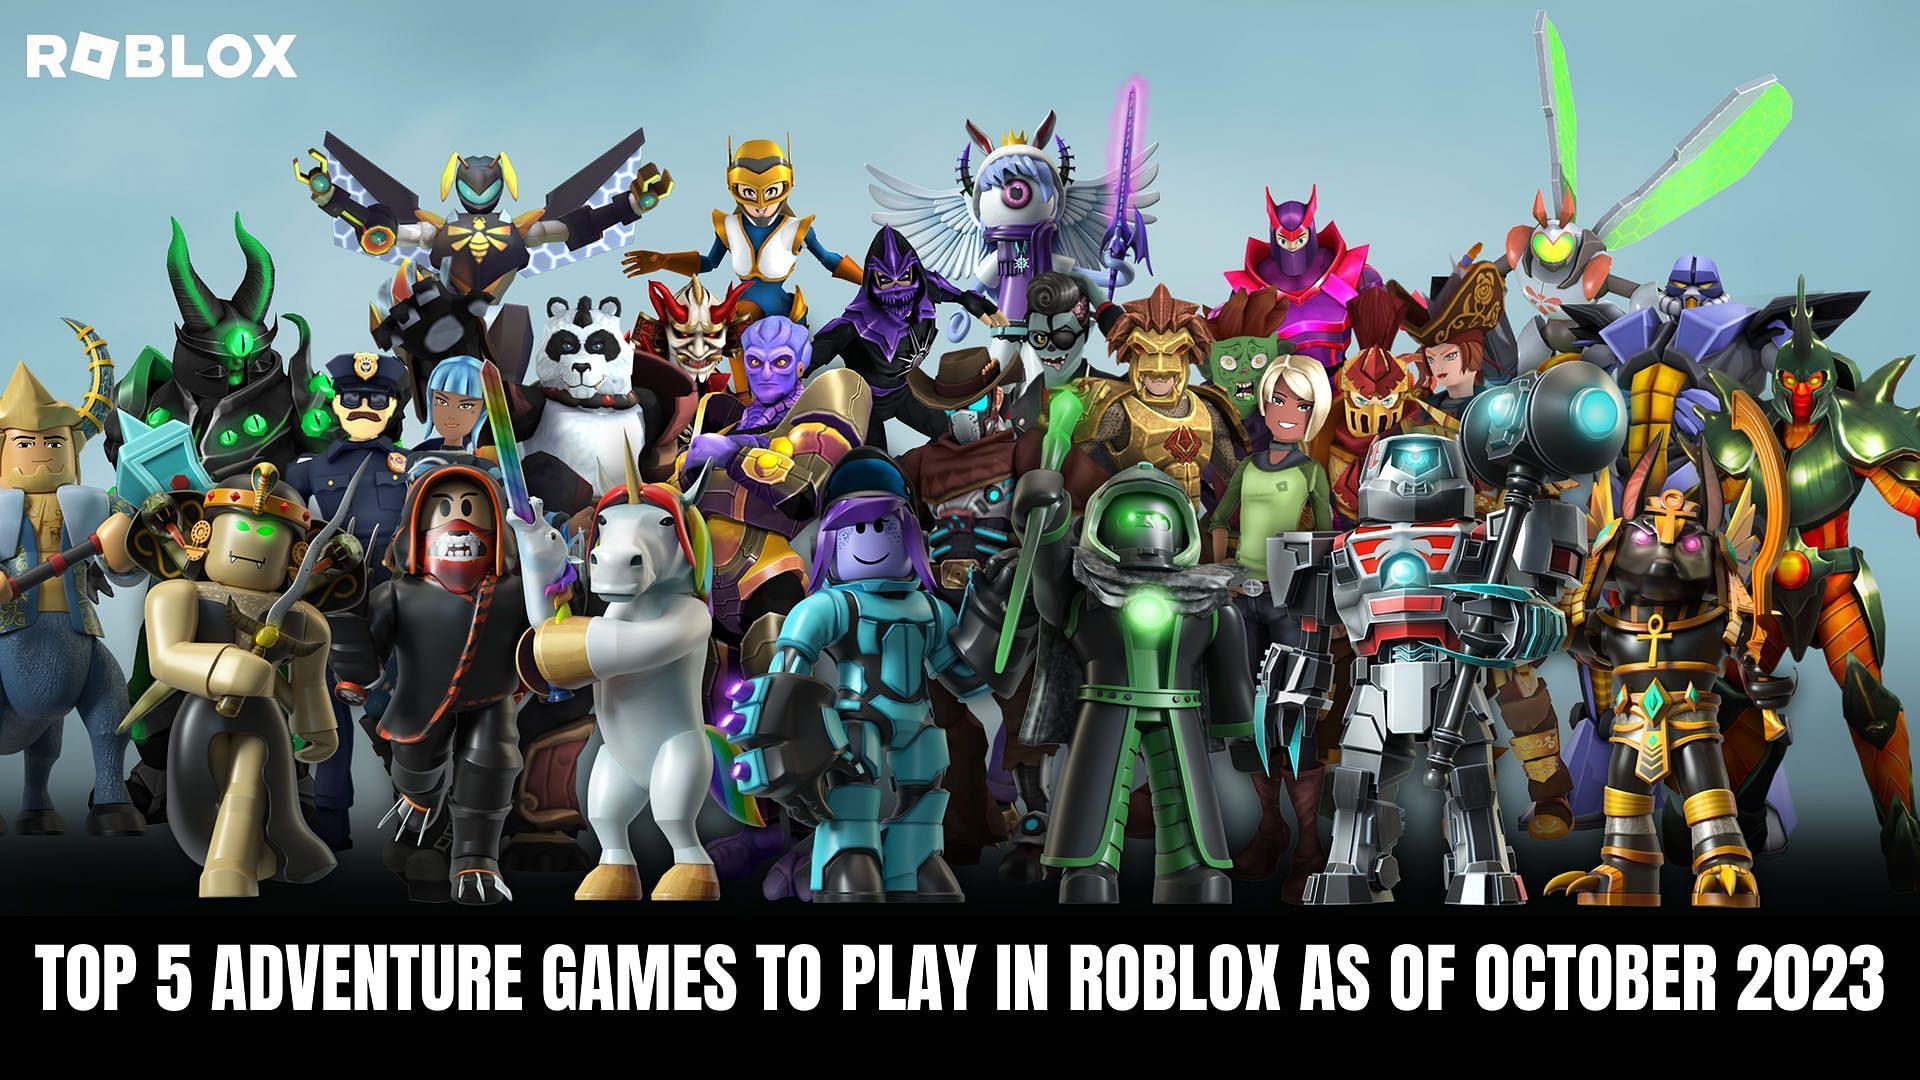 Top 5 adventure games to play in Roblox as of October 2023